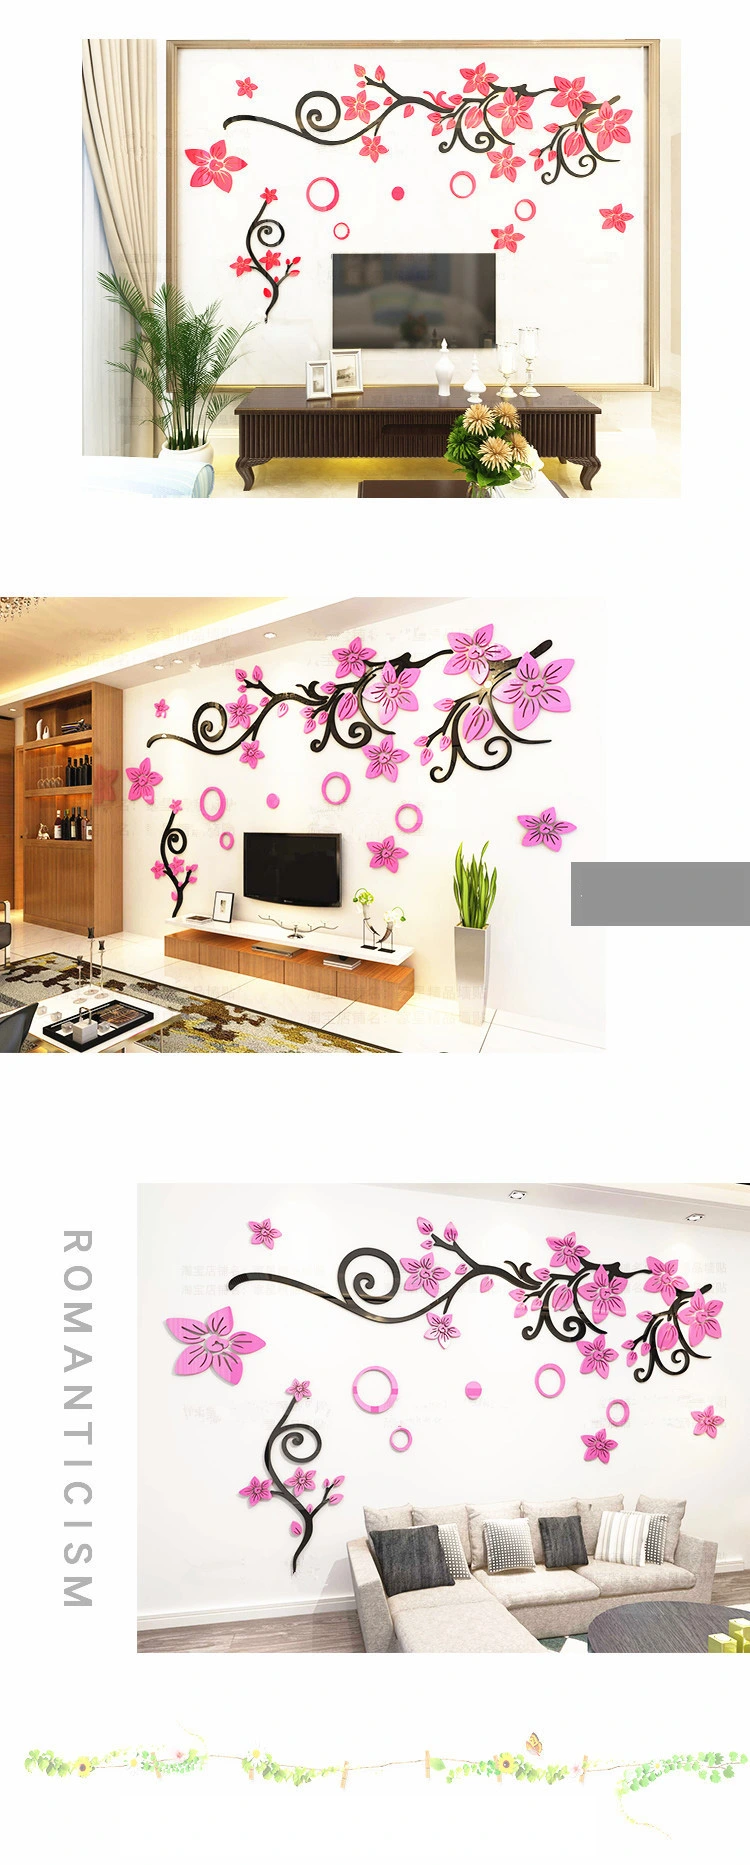 3D Acrylic Wall Stickers for Home Wedding Decoration